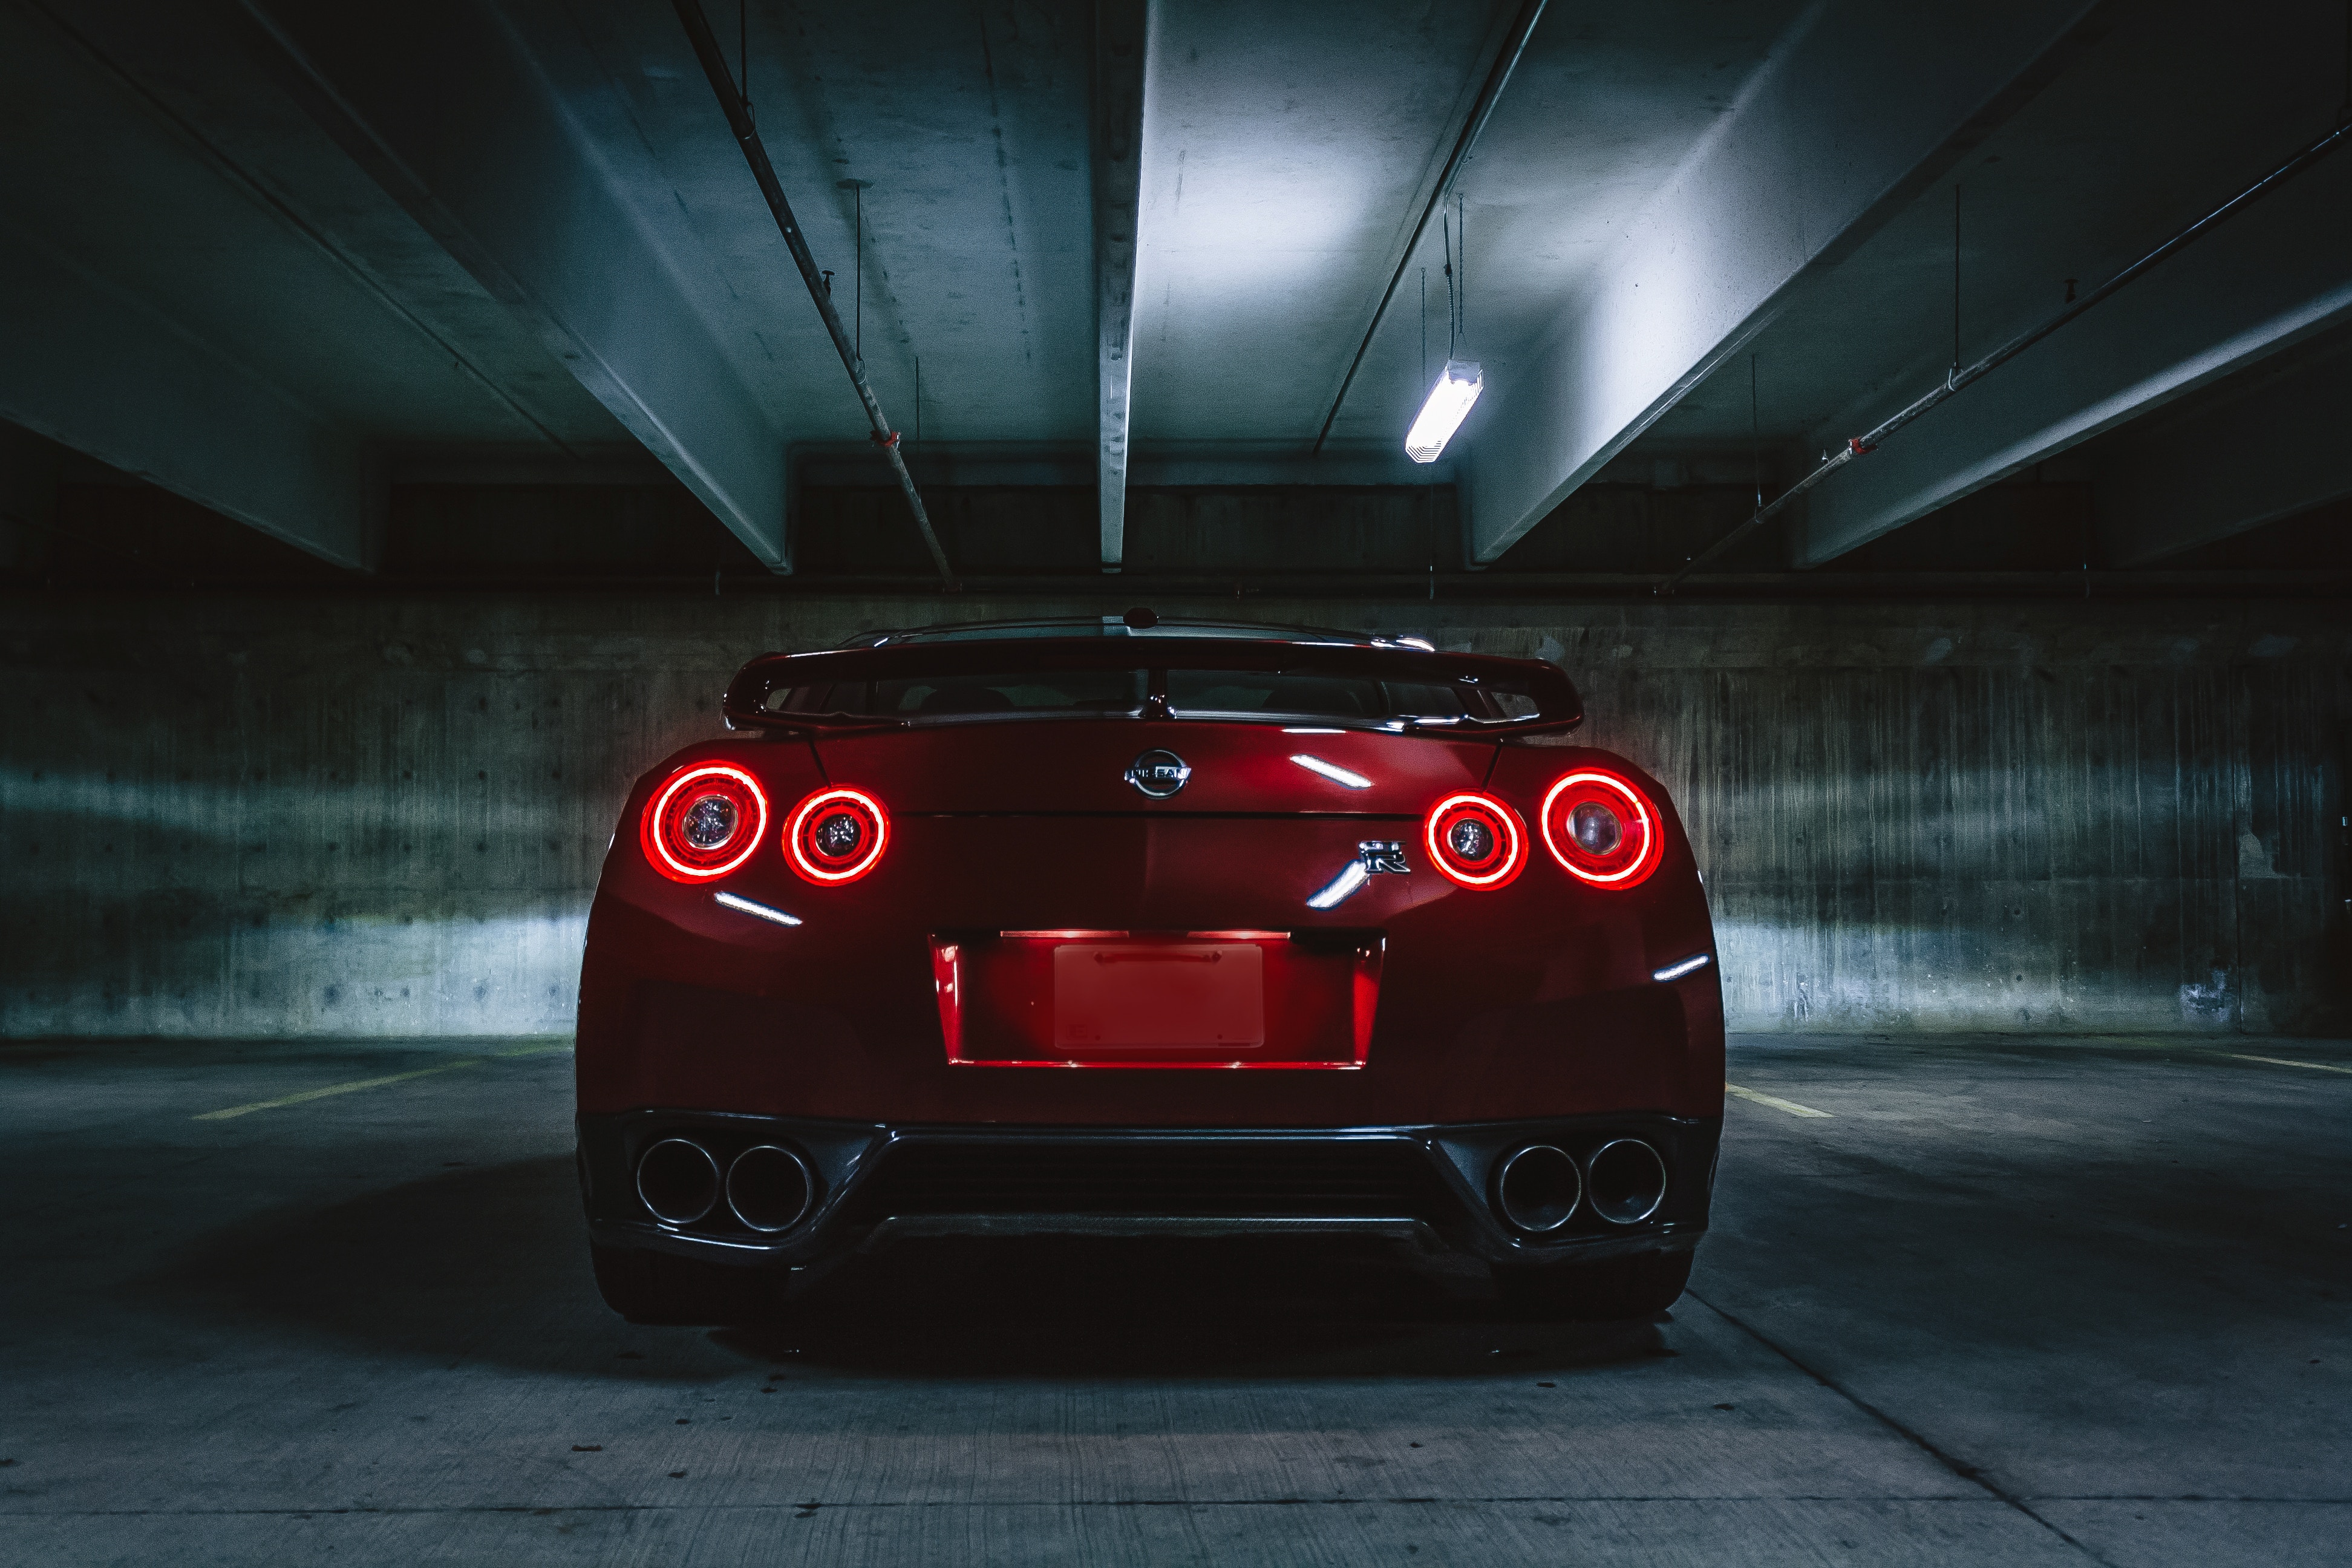 64371 Screensavers and Wallpapers Rear View for phone. Download nissan gtr, nissan, cars, lights, dark, back view, rear view, headlights pictures for free